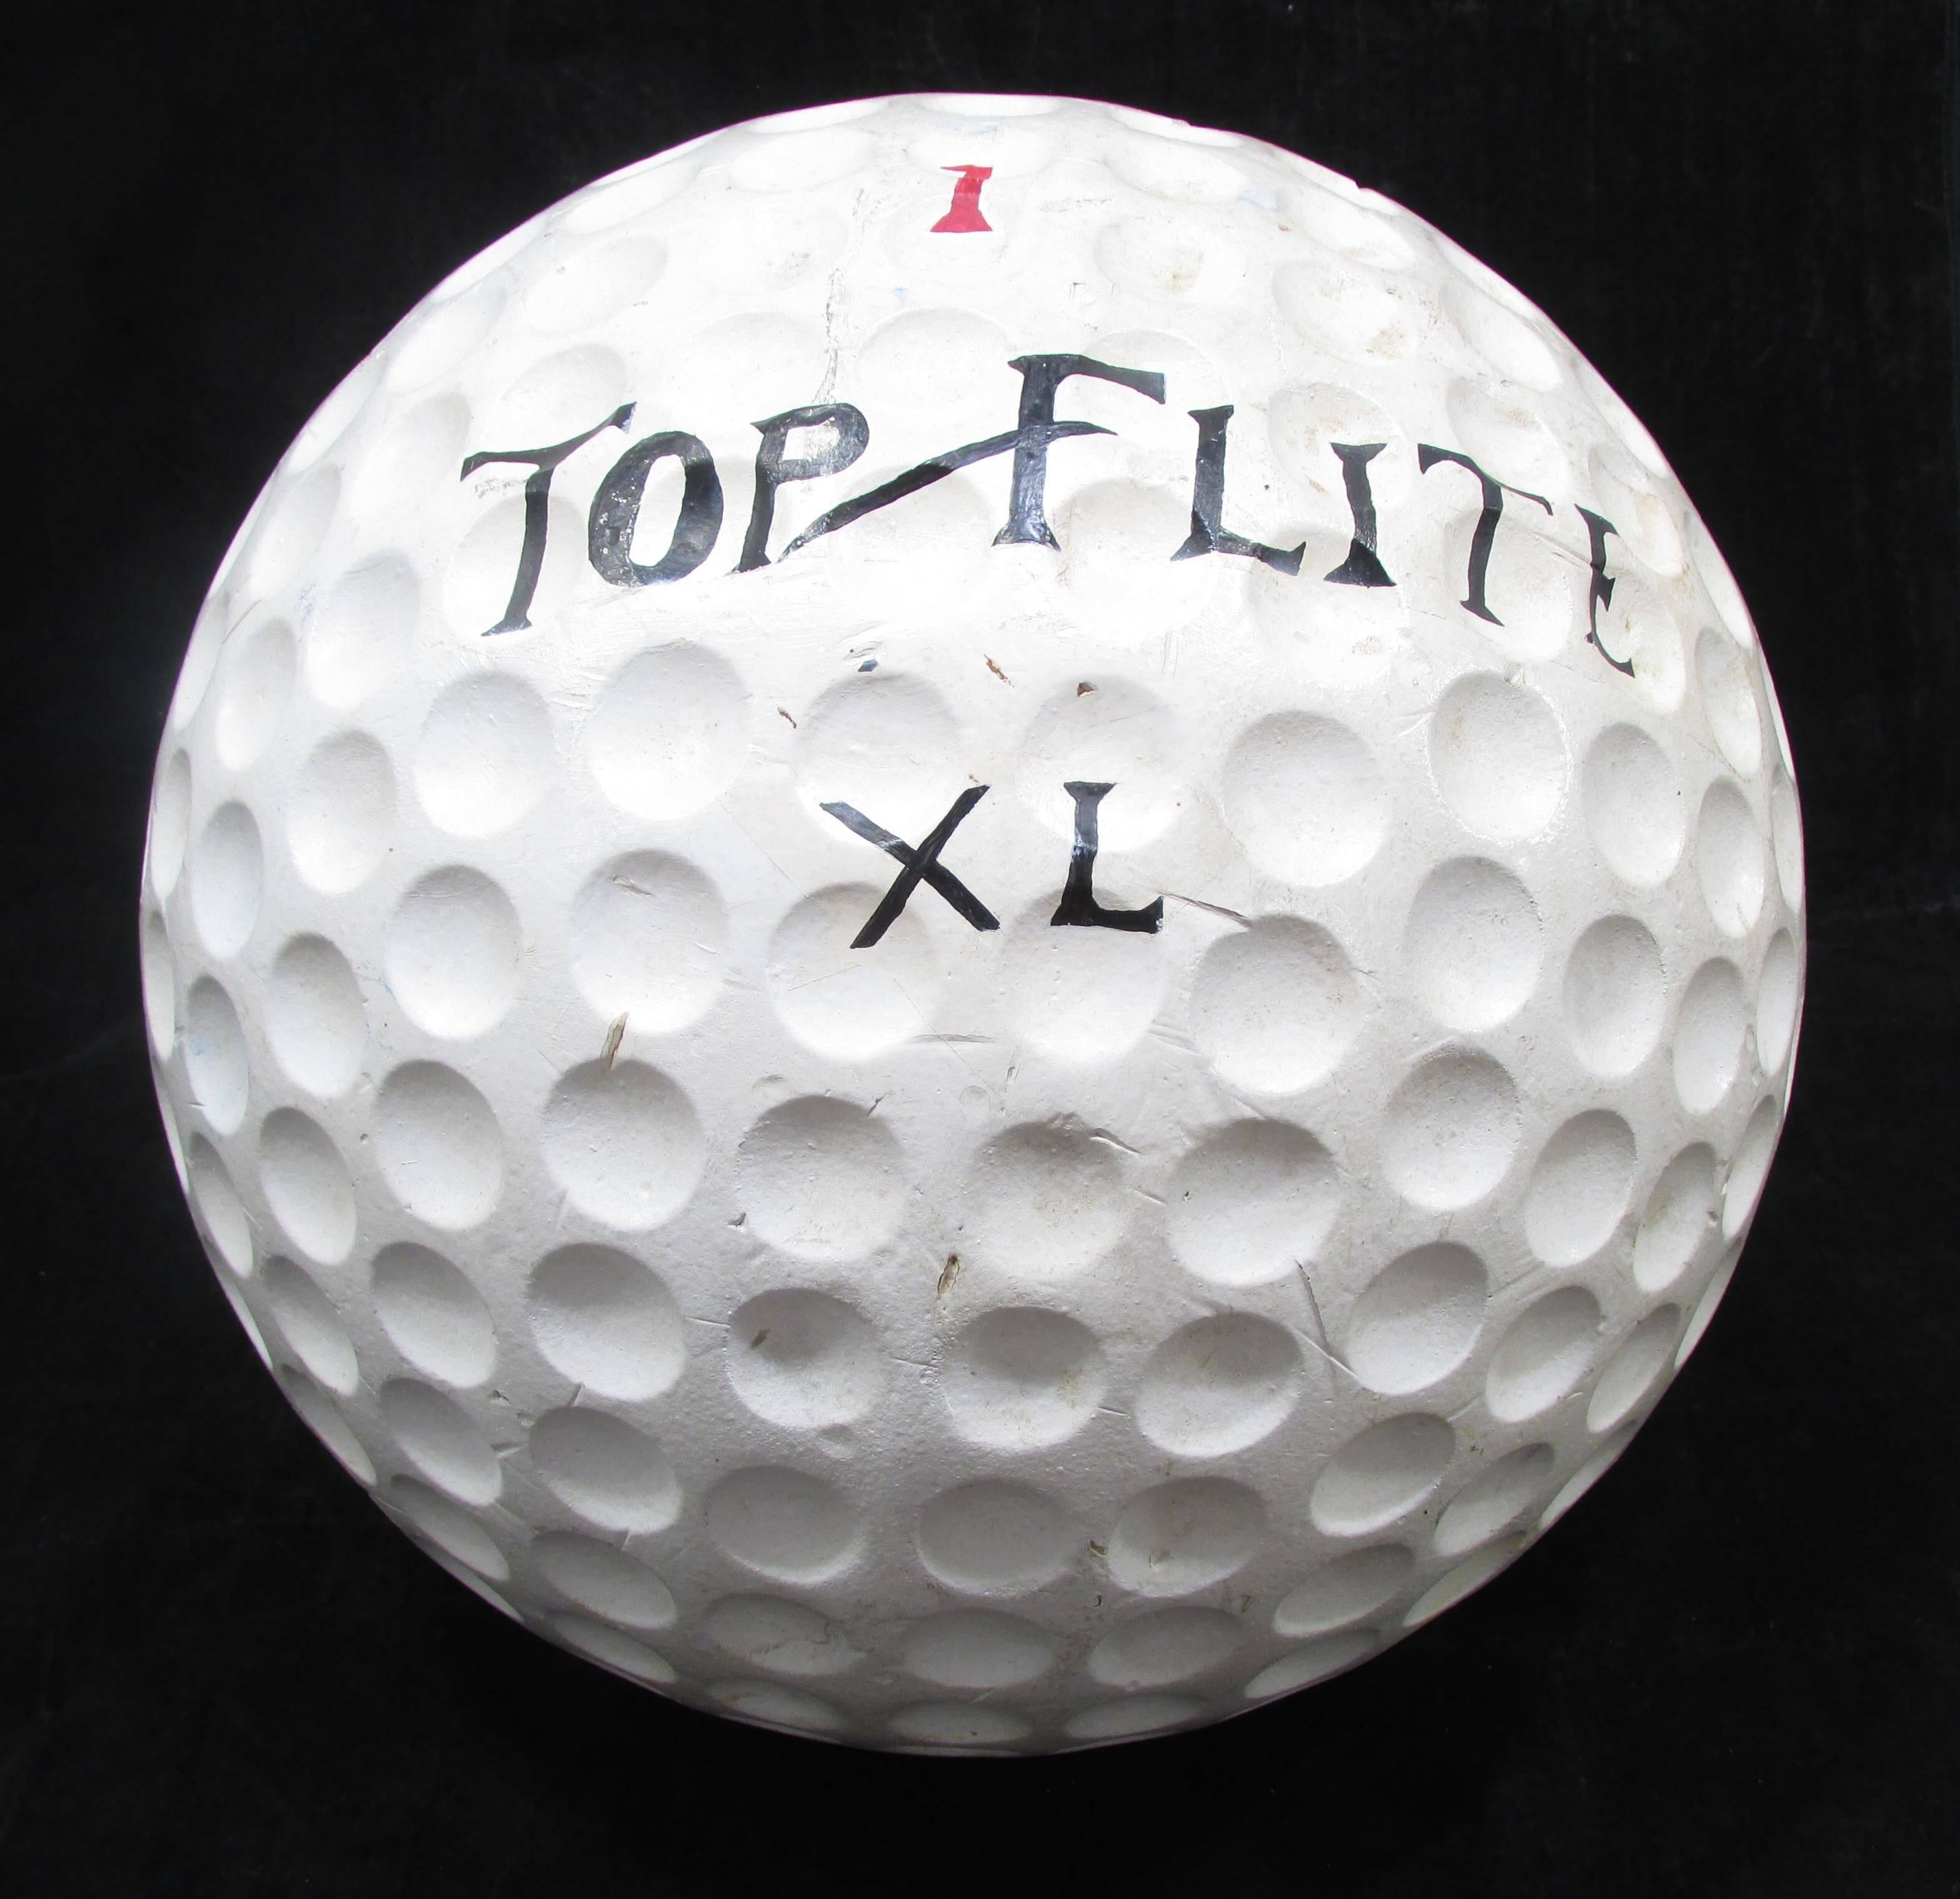 Large-scale golf ball used as a store prop trade sign made of cast hard foam.